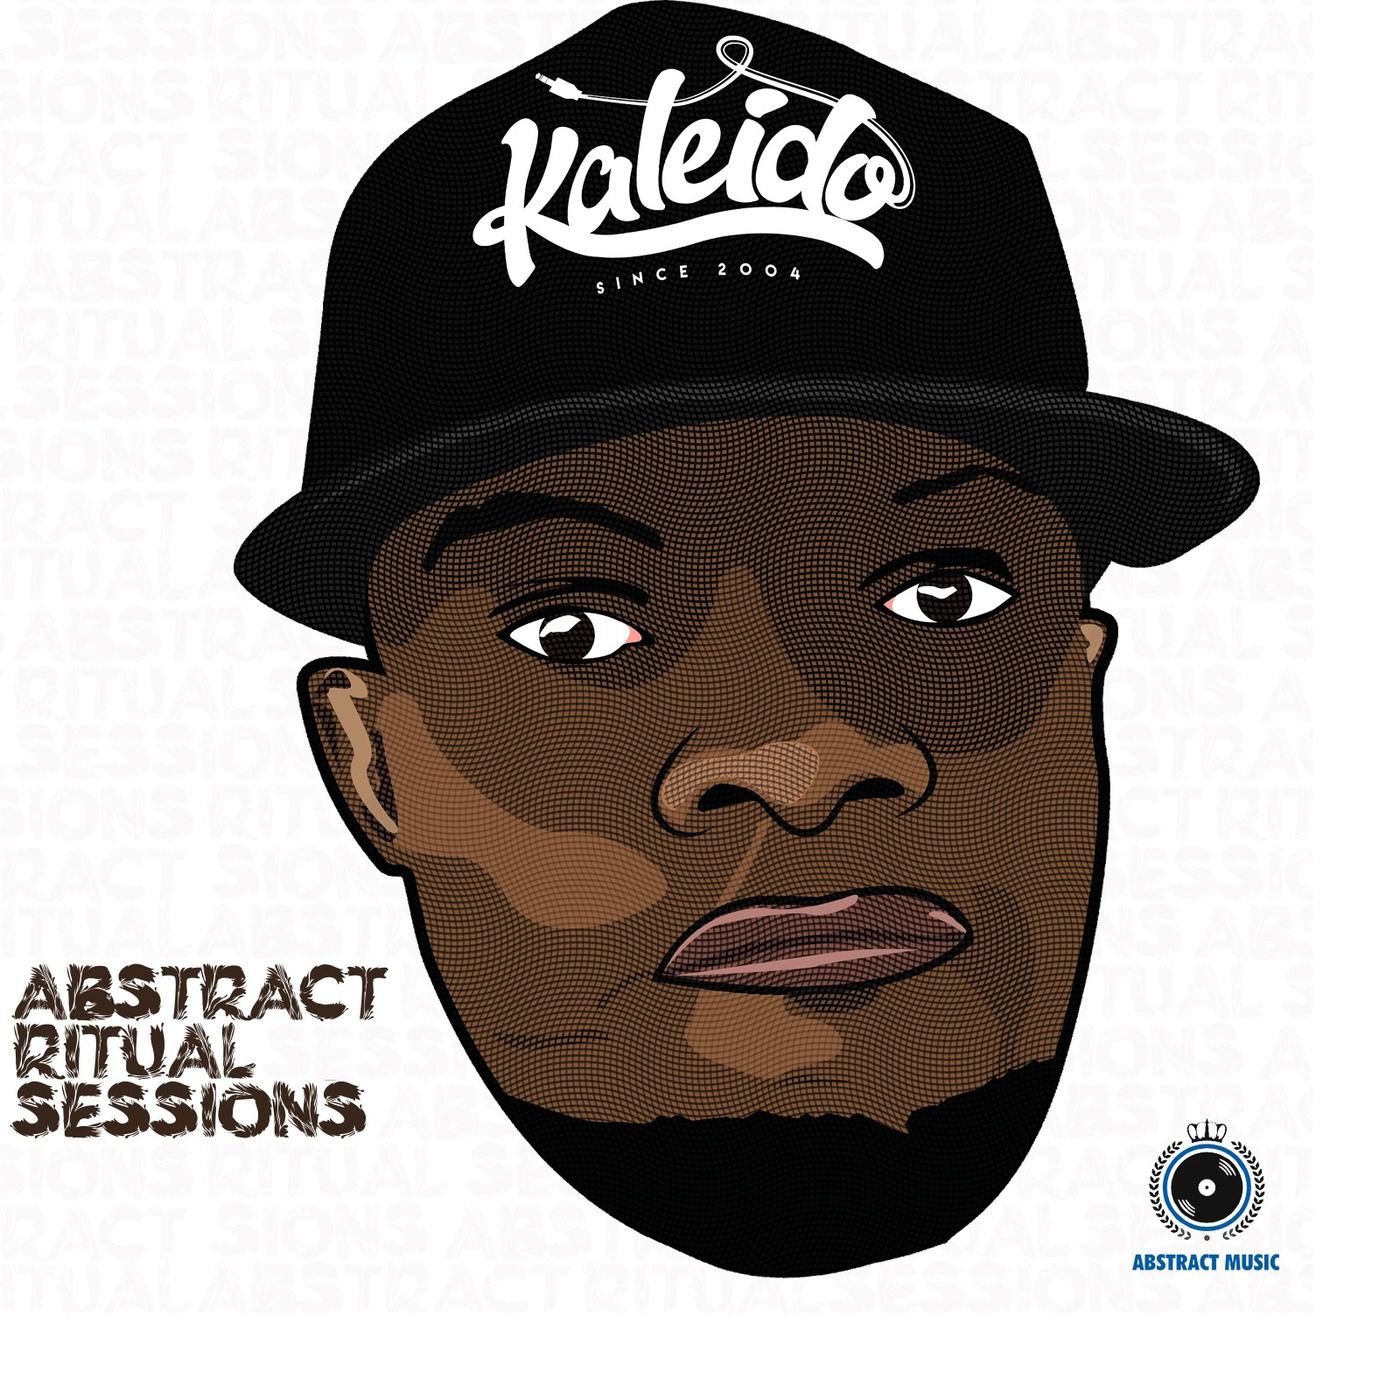 Kaleido - Abstract Ritual Sessions / Abstract Music Pty Ltd